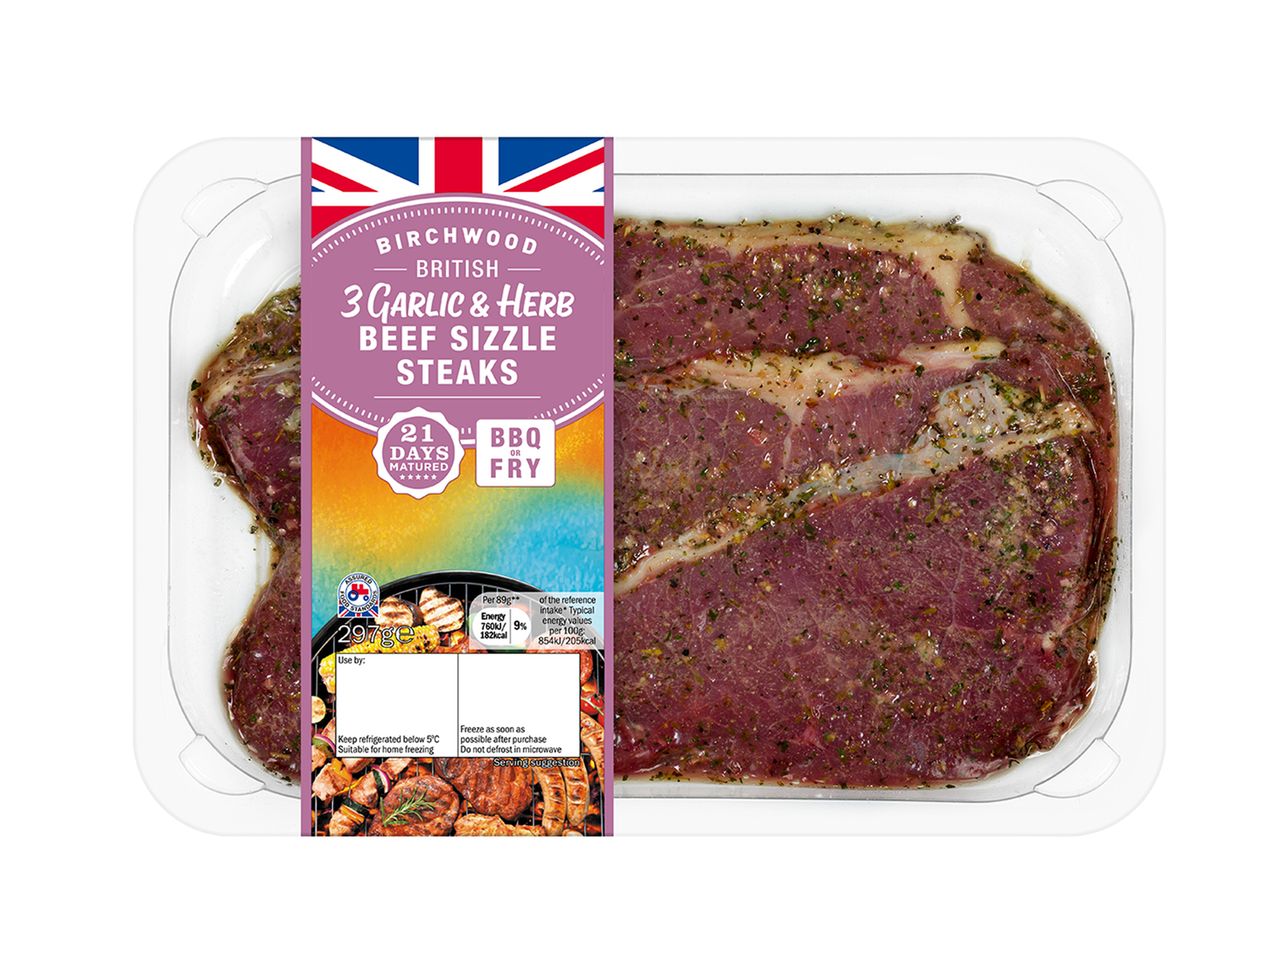 Go to full screen view: Birchwood Beef Sizzle Steaks - Image 1